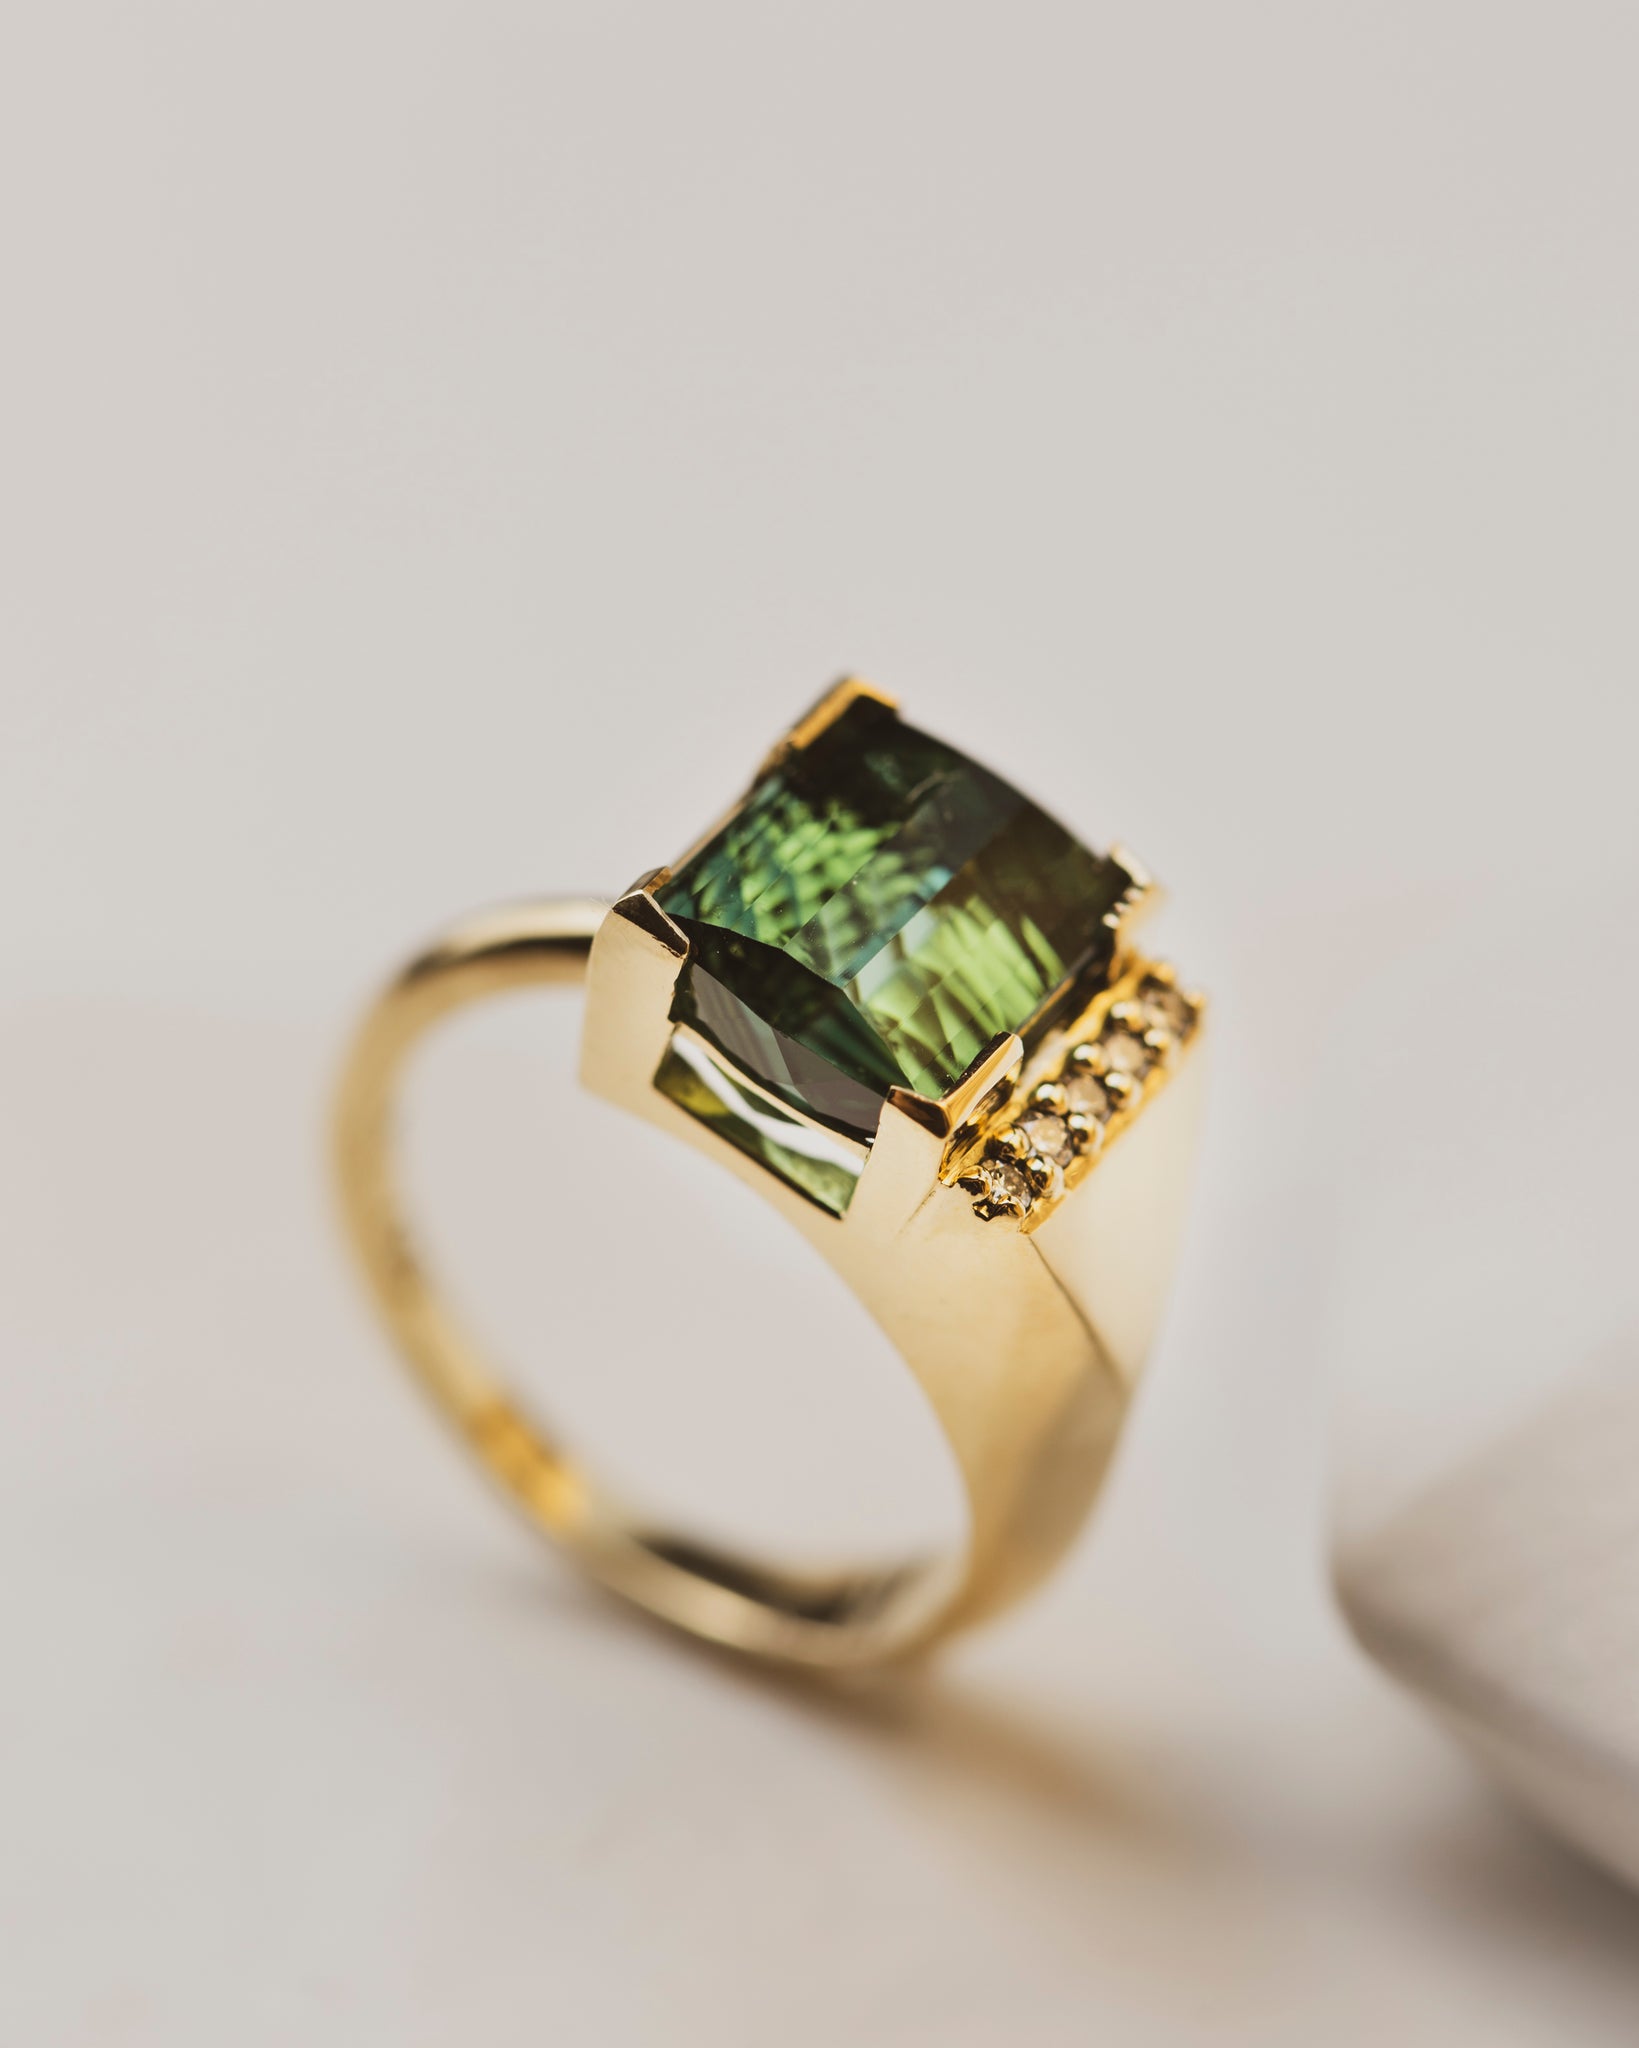 Symmetry and asymmetry play beautifully together in this art deco themed tourmaline ring. The 18K band is a thick knife edge under white diamonds on one side, meeting the other side of the parti4.6 carat partial bezel set Tourmaline Ring with five 1.5mm white diamonds